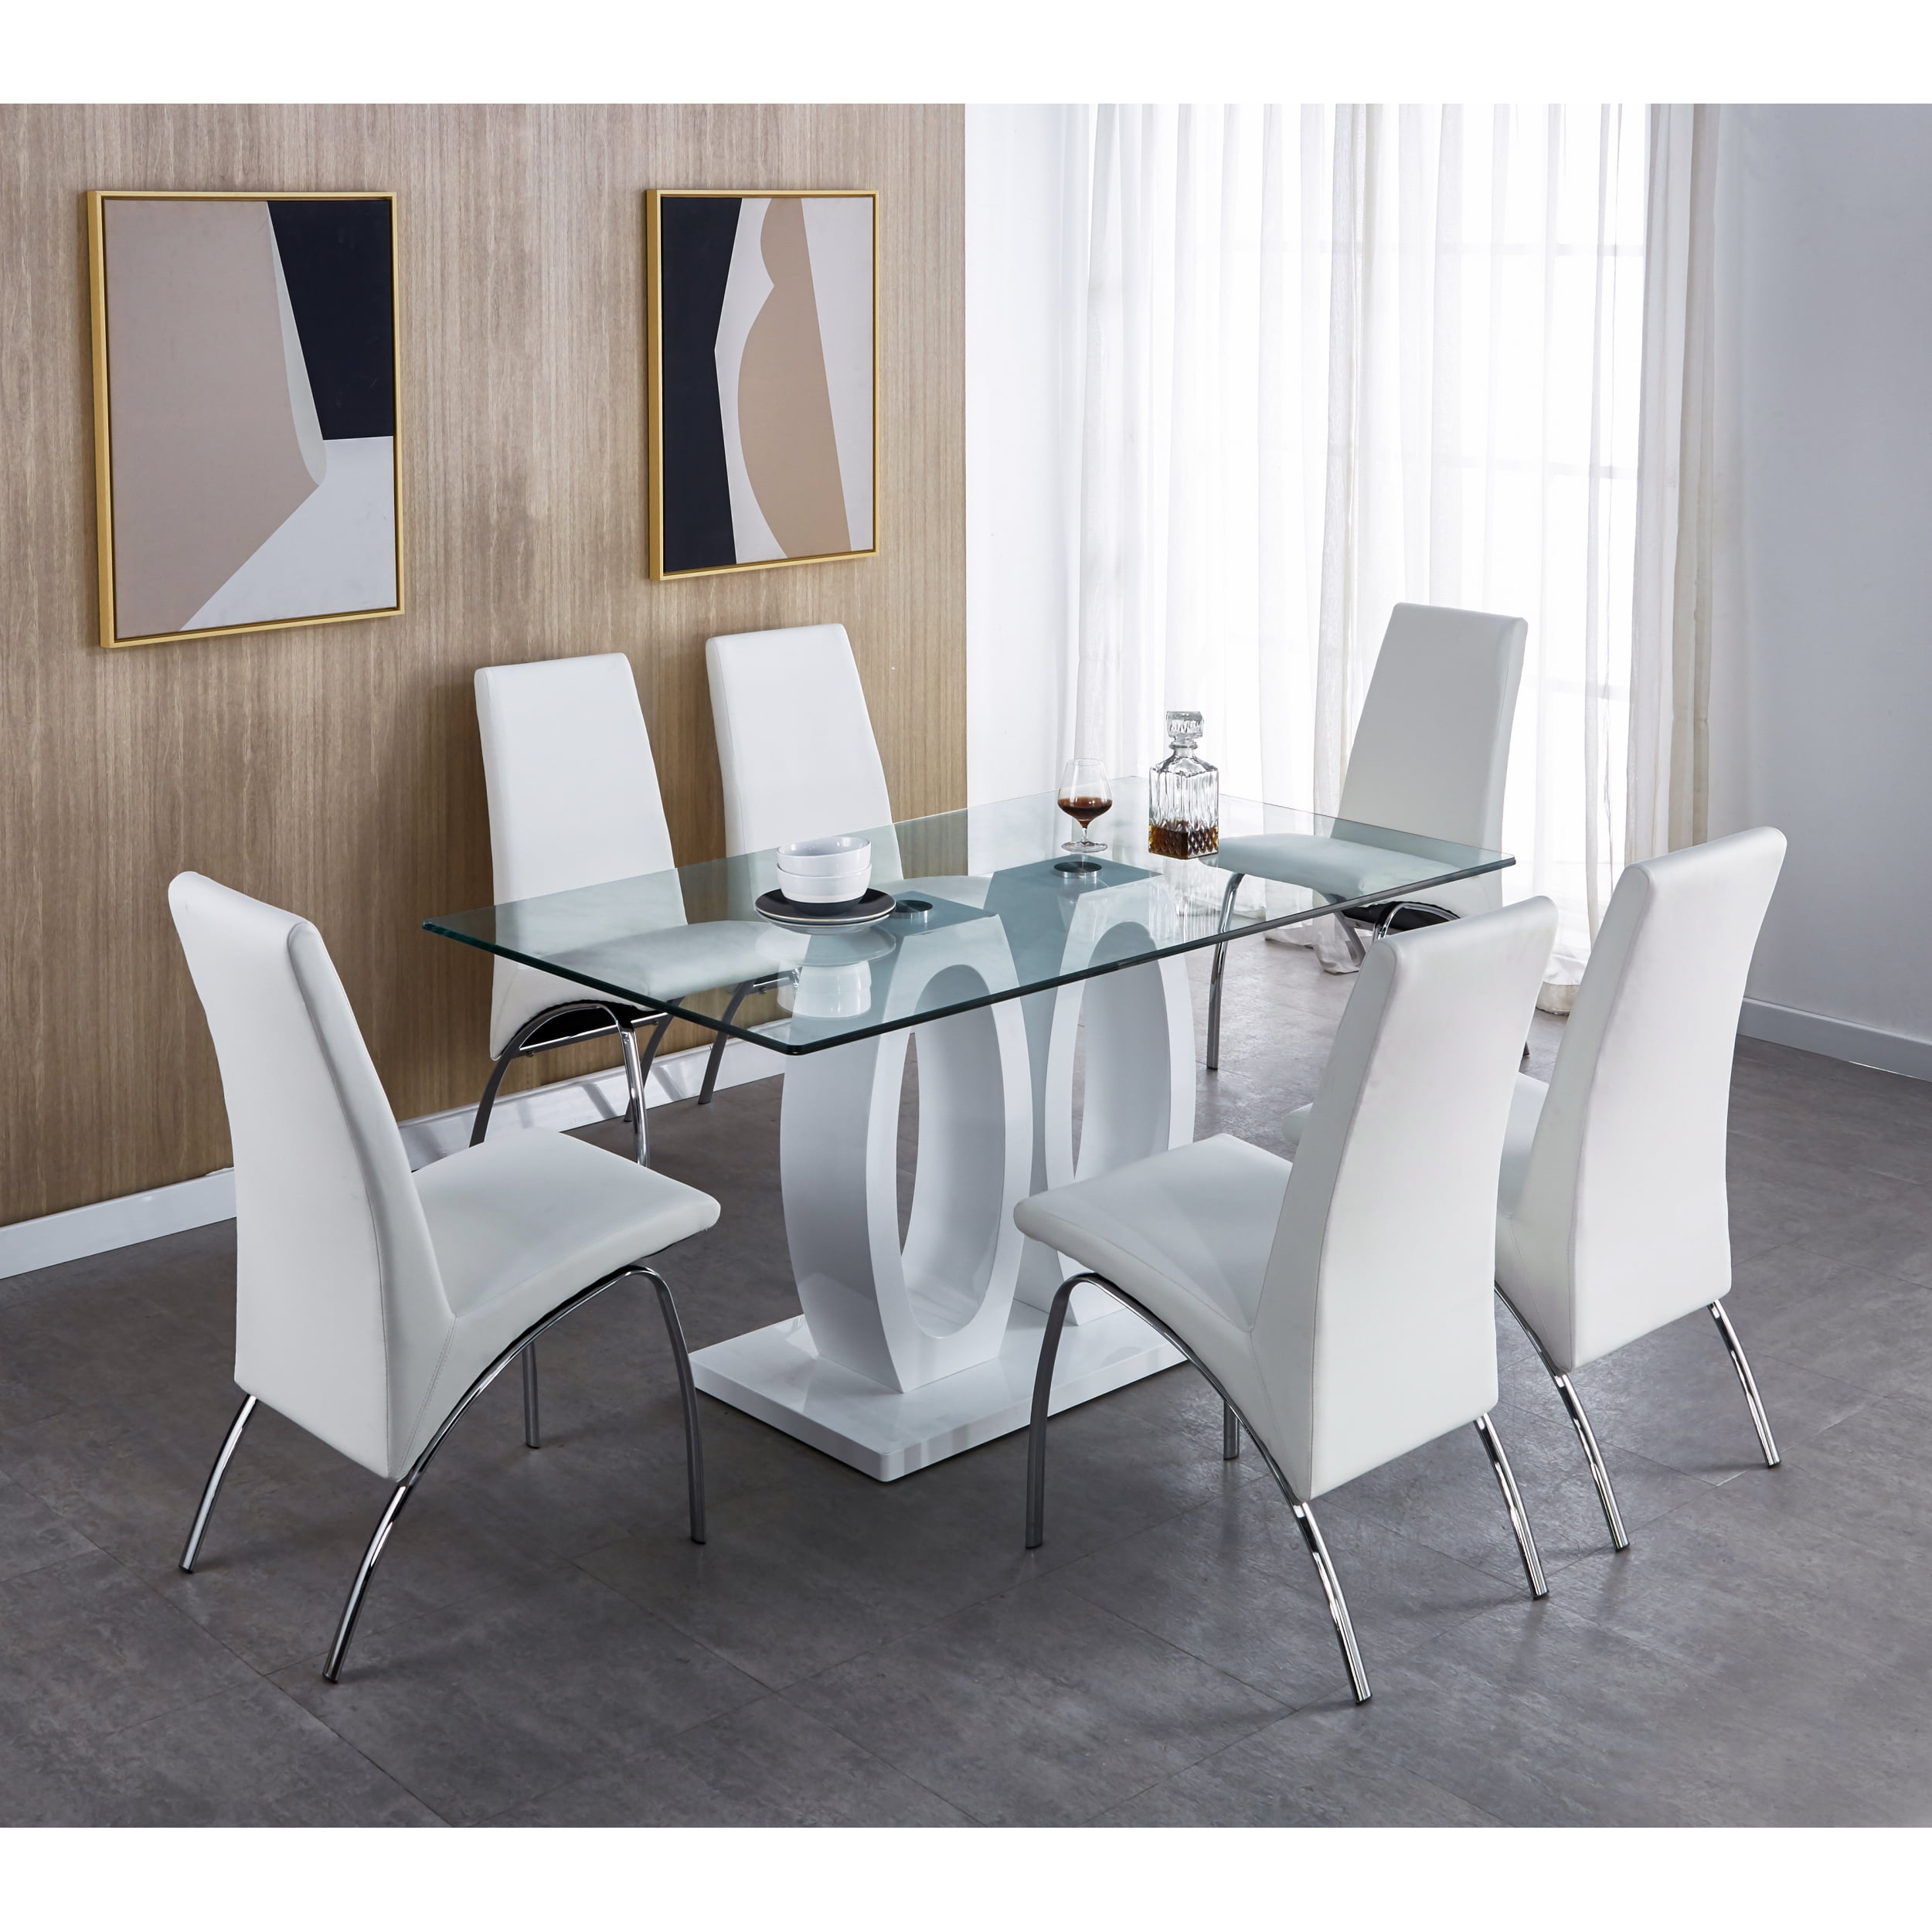 Modern Design Wood Dining Table in White Finish, Clear Glass Top, for 6 ...